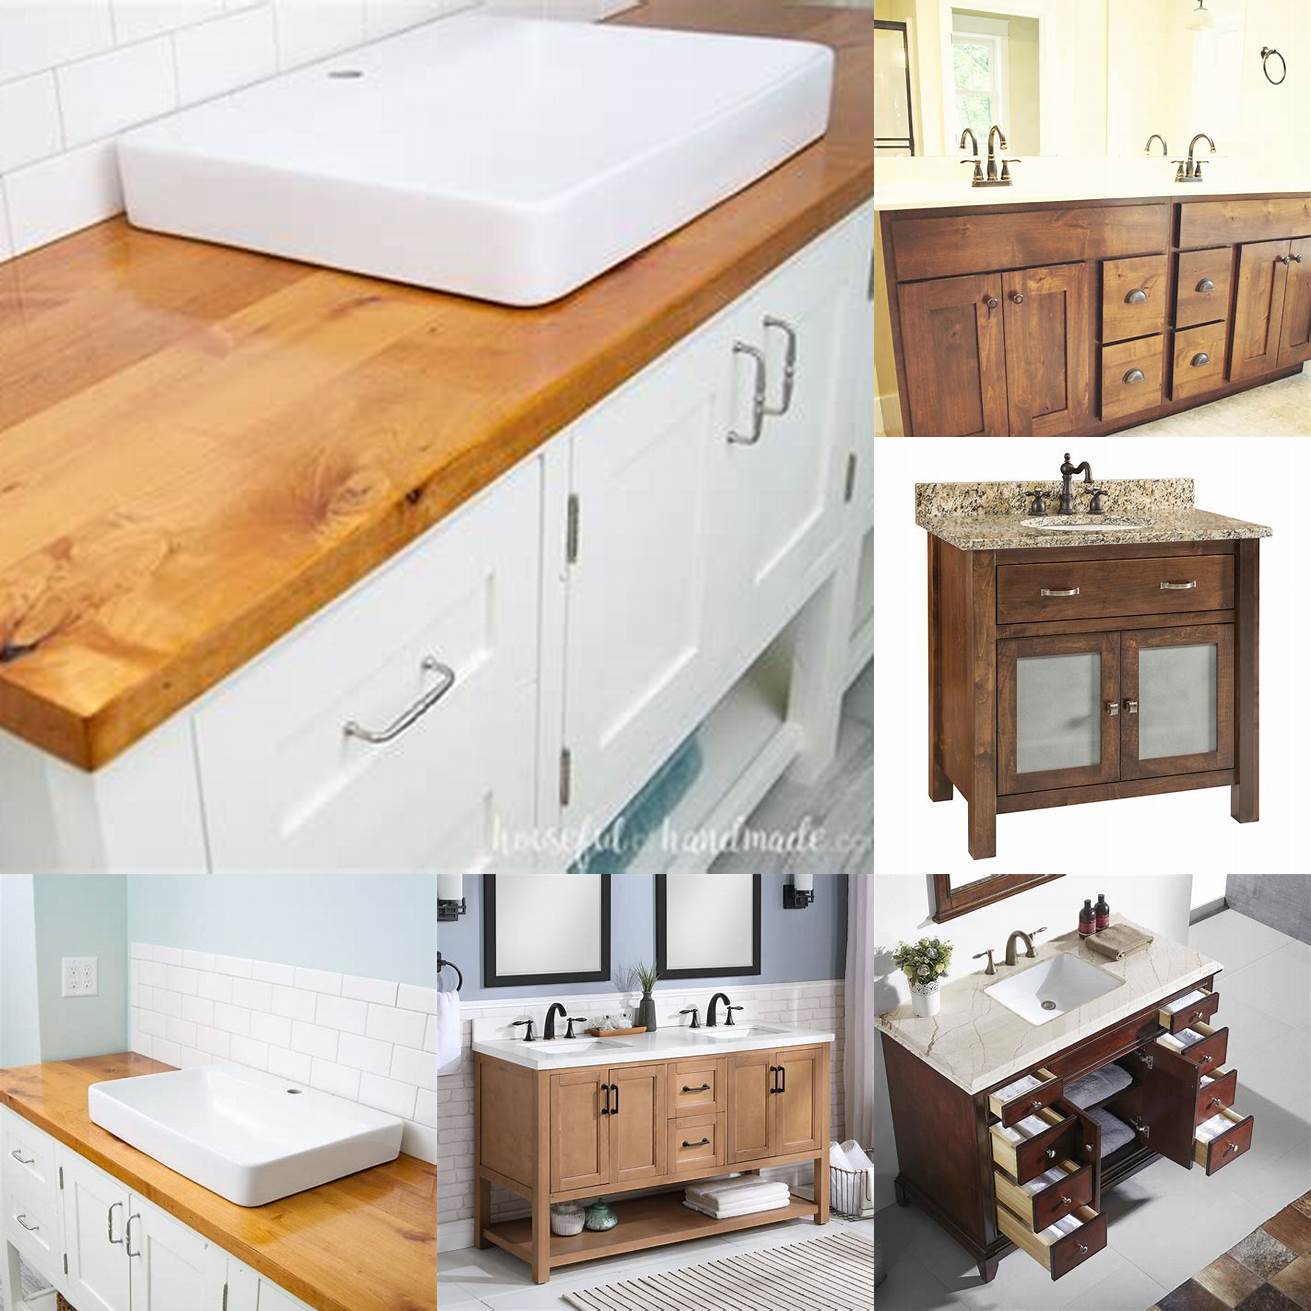 Seal wood vanities If you have a wood vanity be sure to seal it properly to protect it from water damage